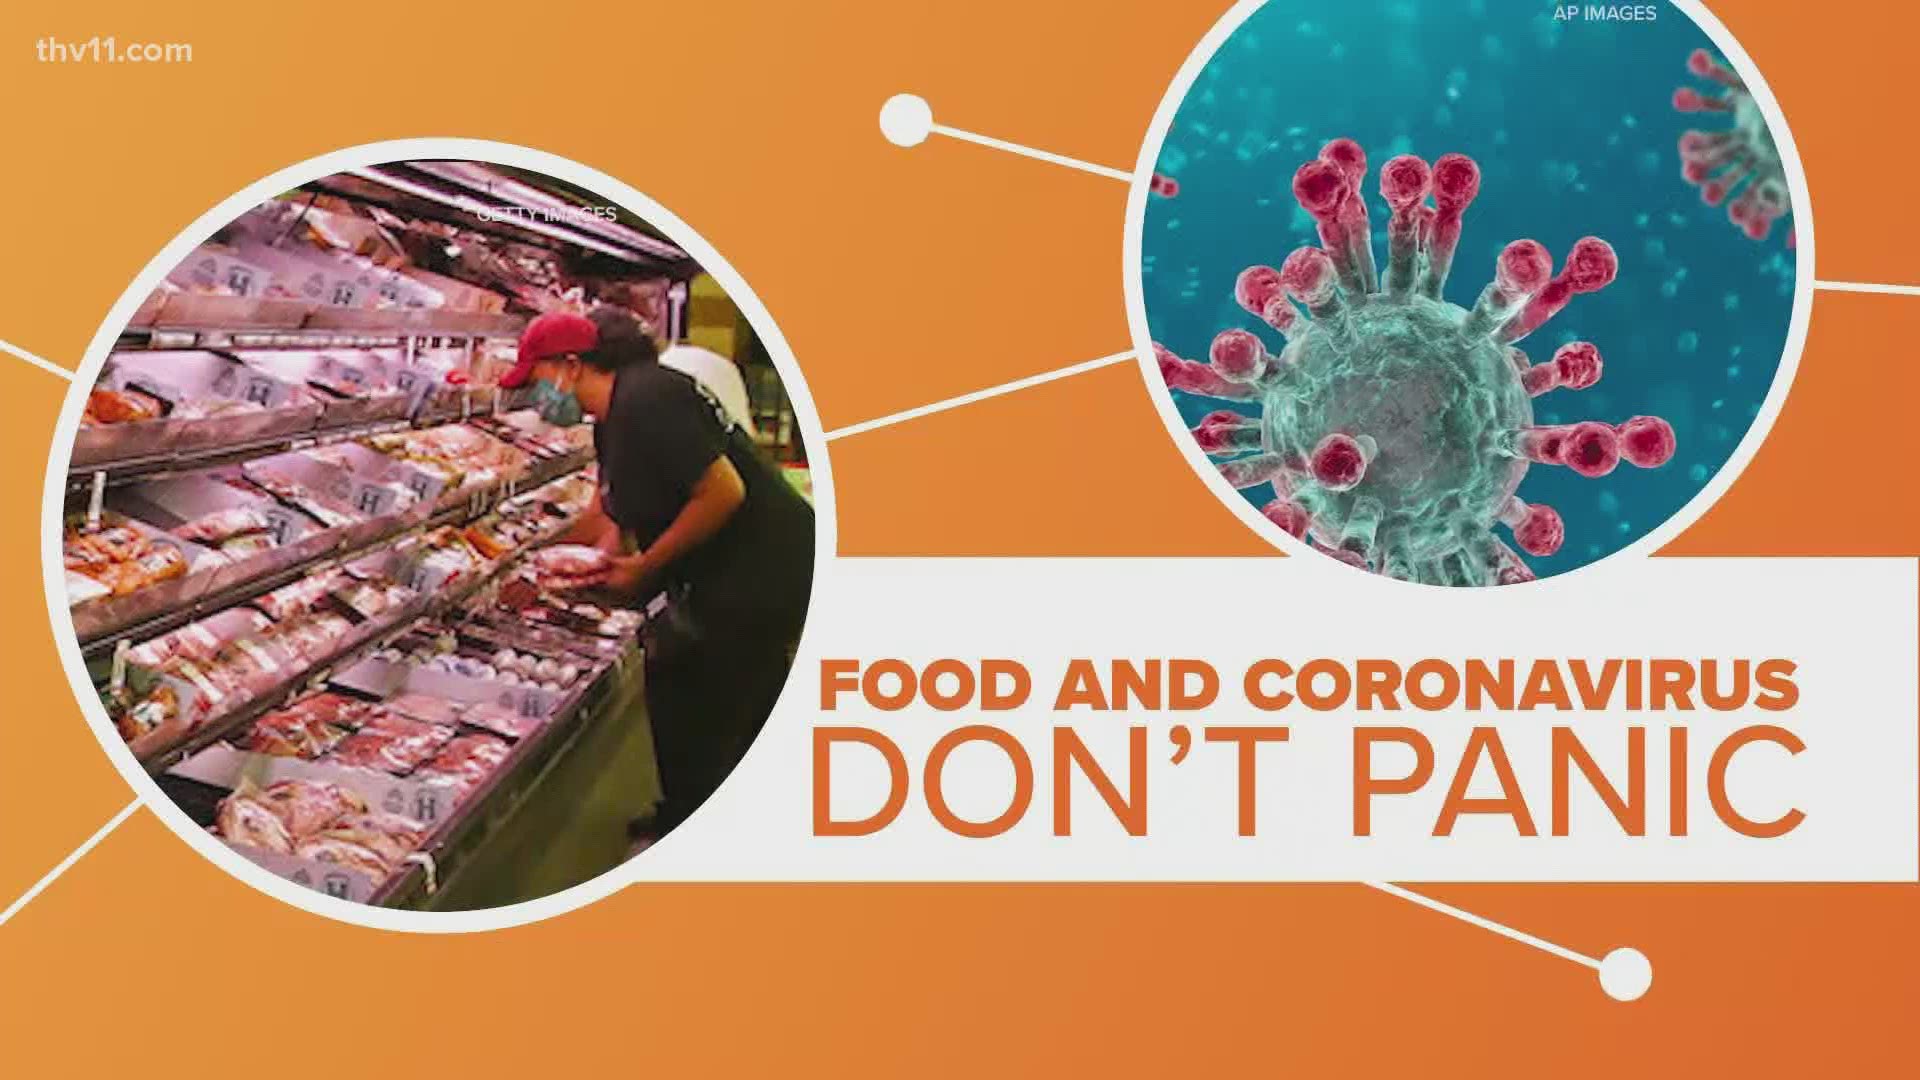 You've heard the phrase "you are what you eat," but could be eating coronavirus? It's a question that sent social media into a panic recently.